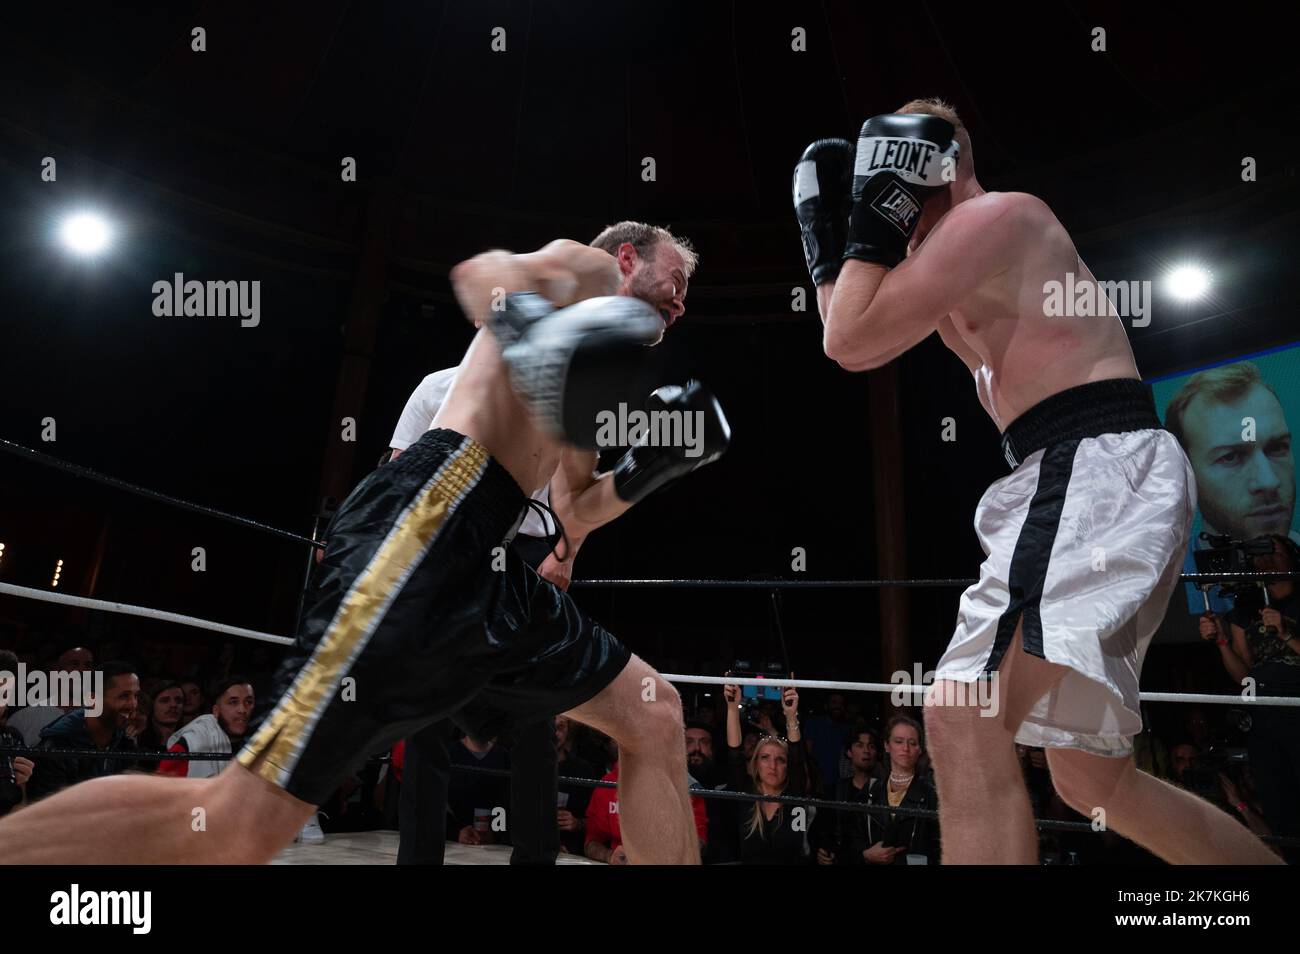 E4, uppercut… chessboxing off to a punchy start in France